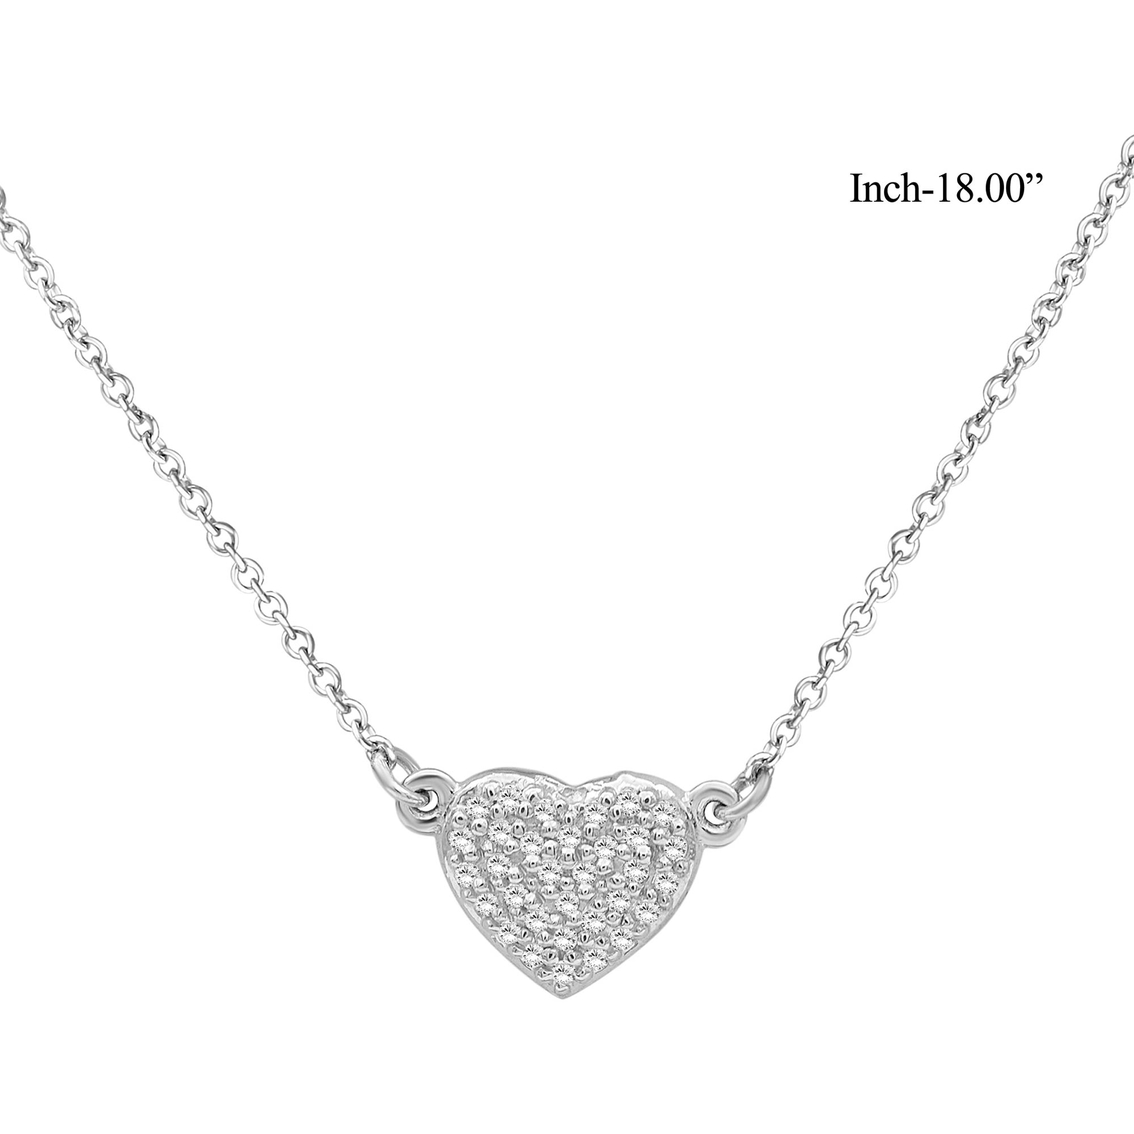 She Shines Sterling Silver 1/4 CTW Diamond Earring and Necklace Set - Image 4 of 7